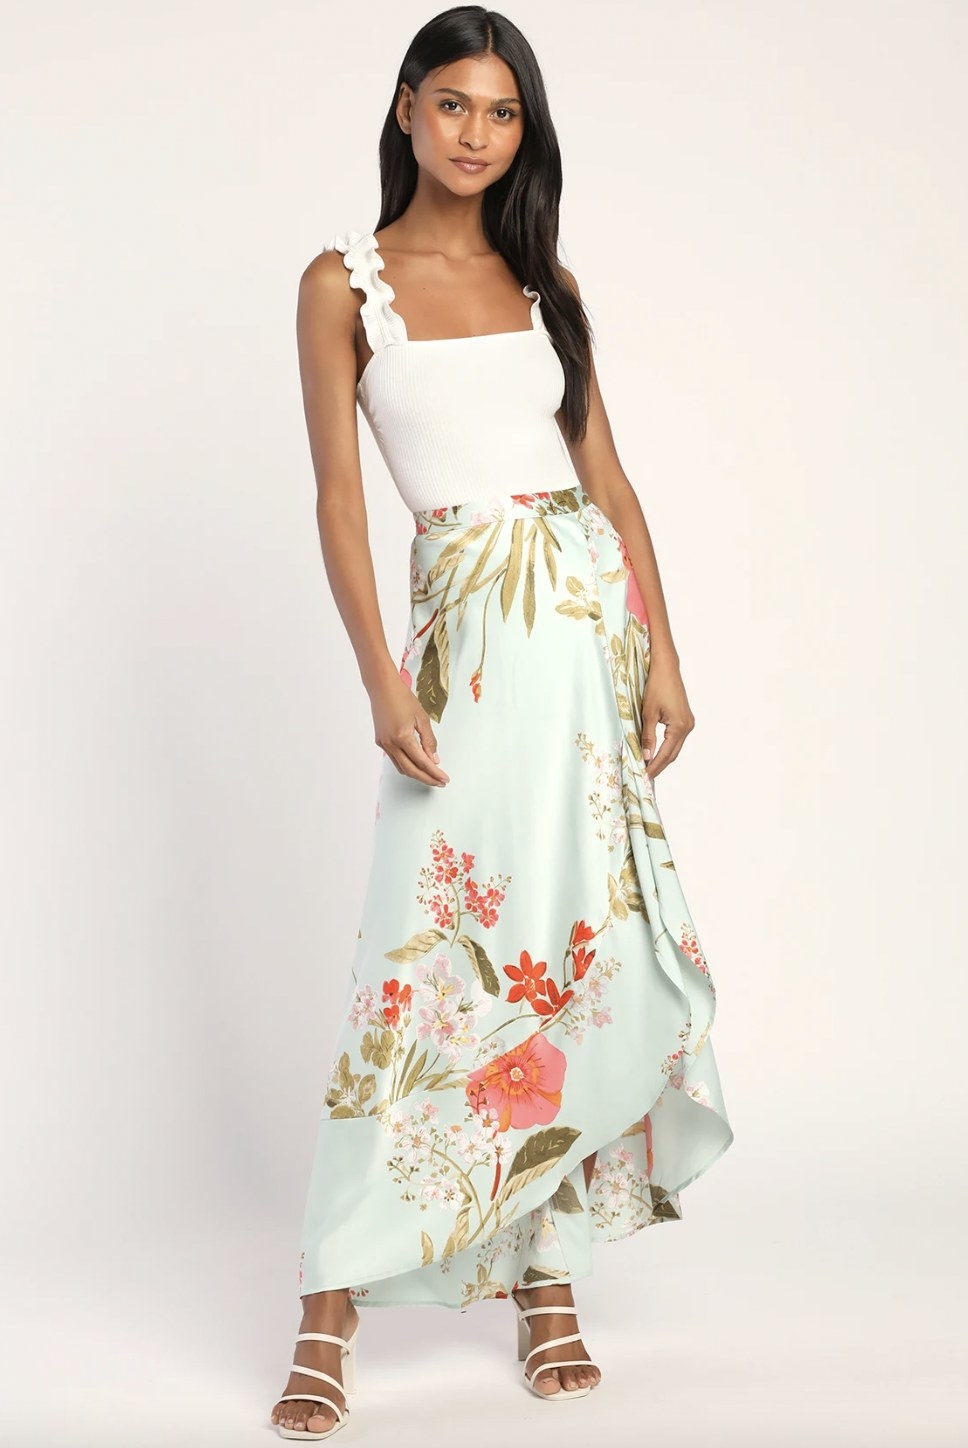 A model wearing a mint colored maxi skirt with floral details